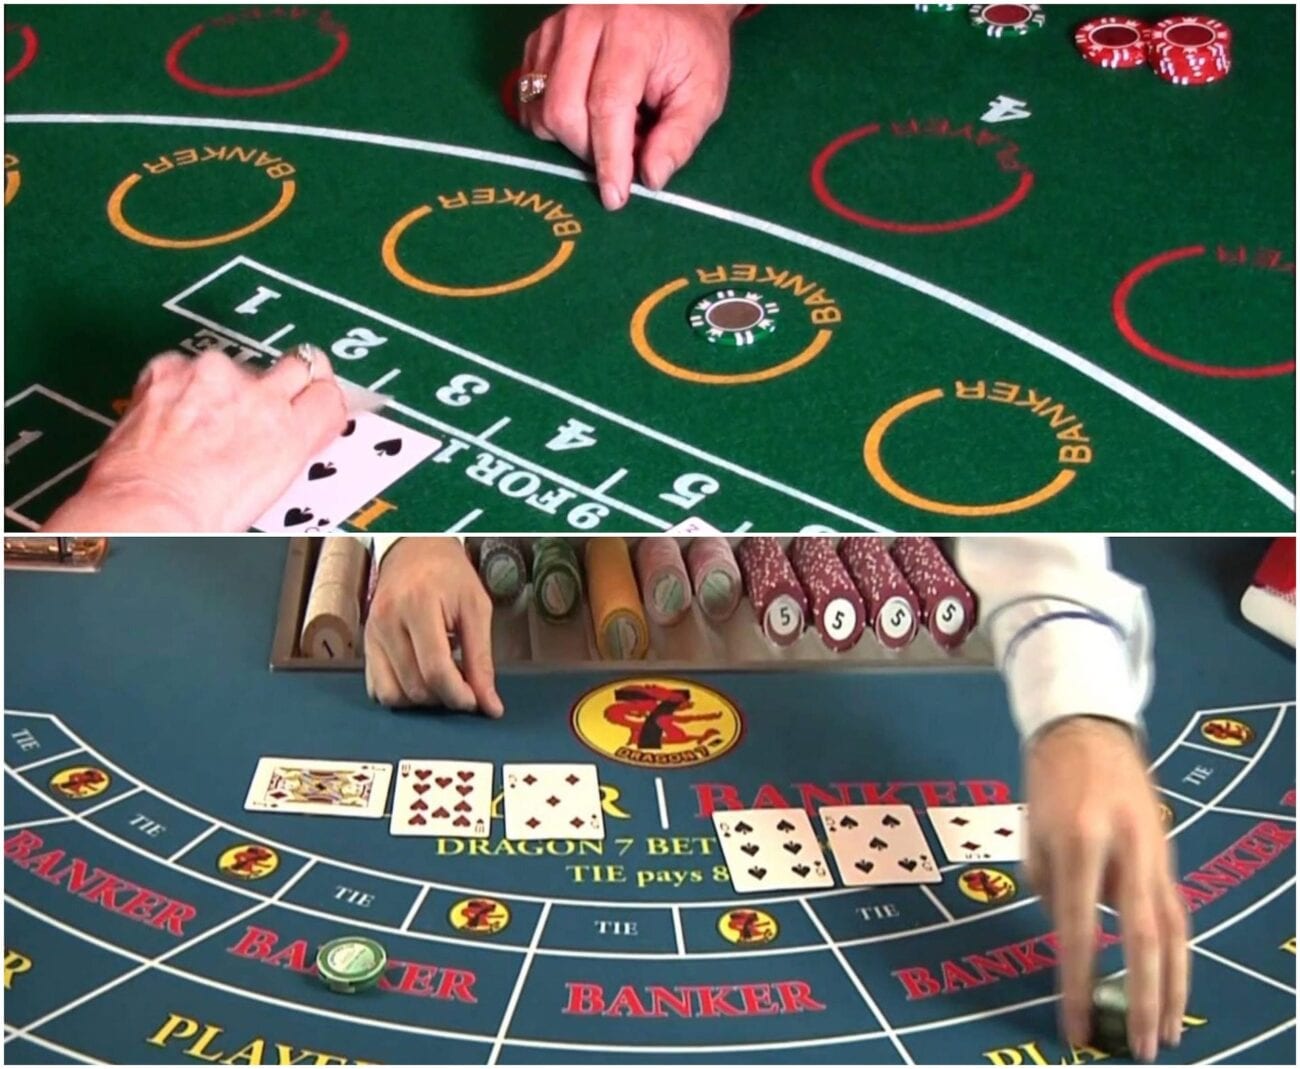 How Has The US Baccarat Changed Due To Asians?